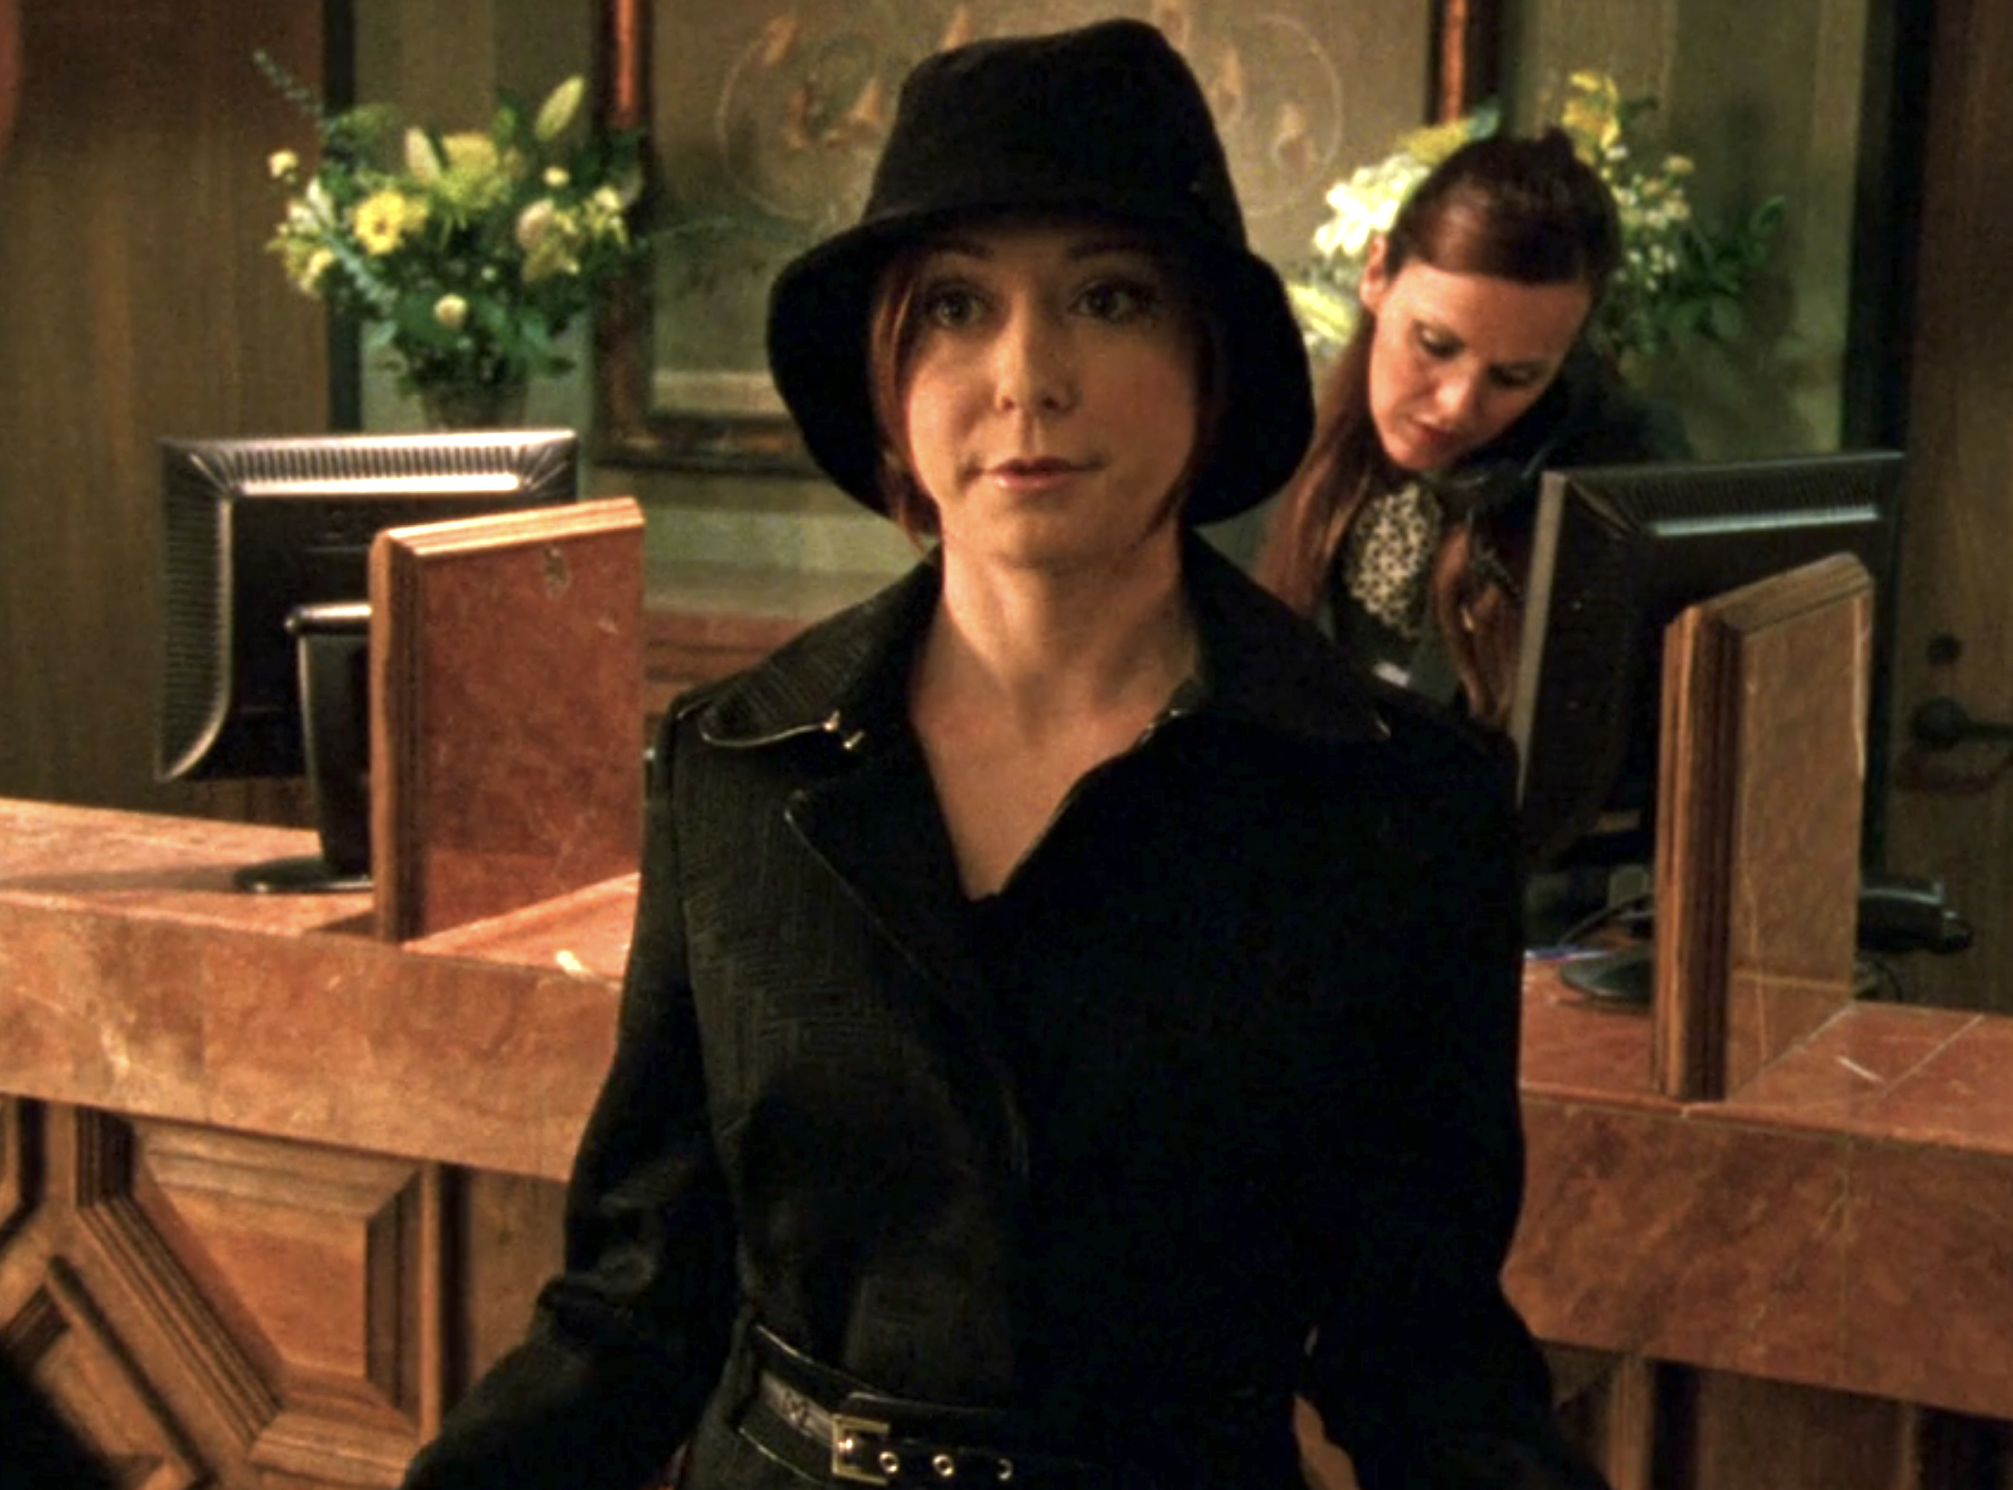 Screenshot from Veronica Mars S1E15. Alyson Hannigan in a black coat and black hat and looking glam is in a hotel lobby.